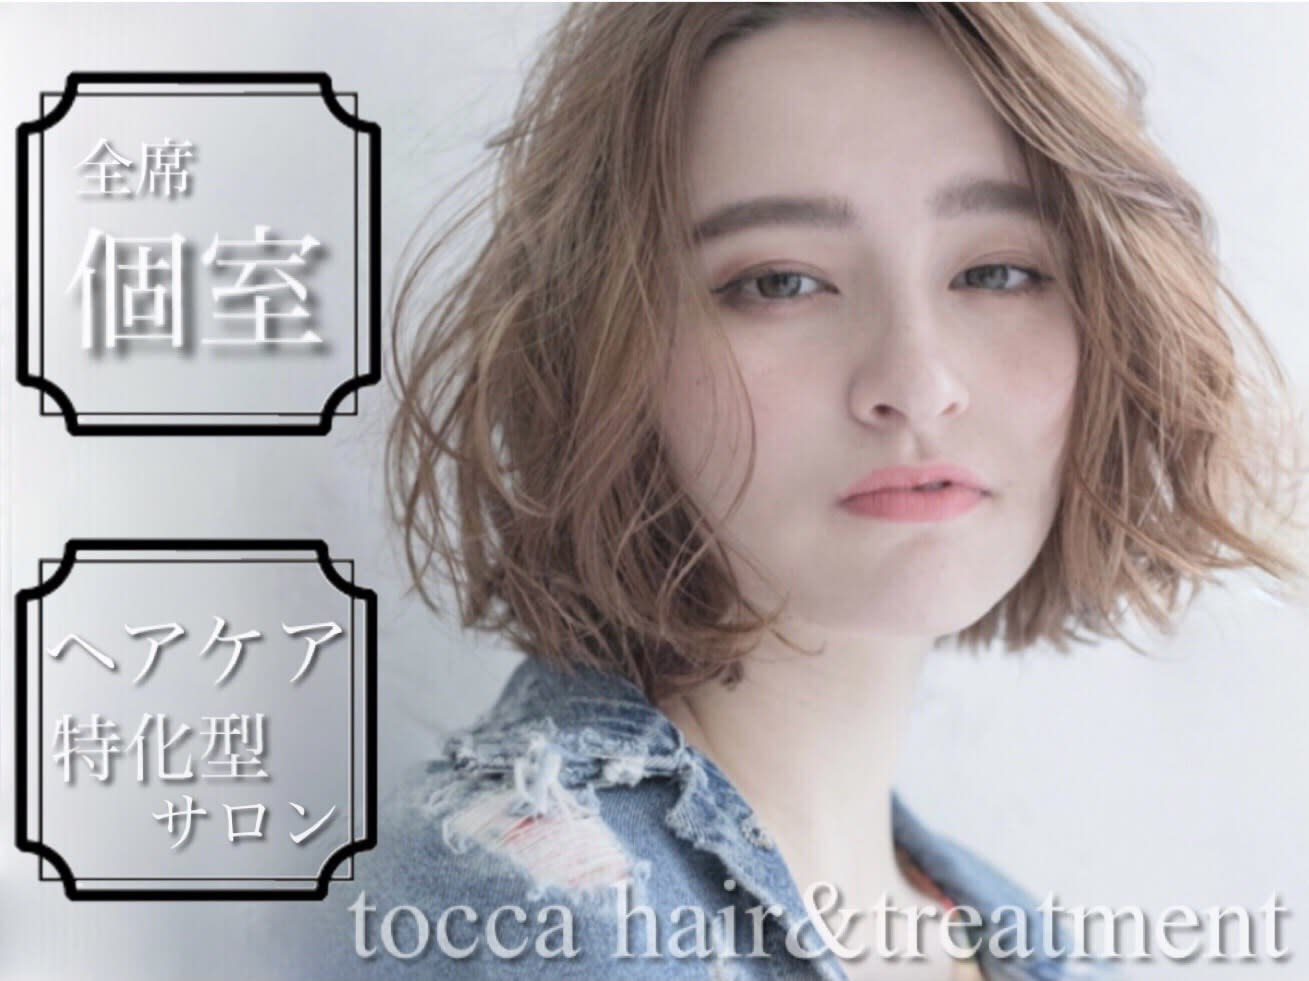 tocca hair&treatment 天王寺店のアイキャッチ画像